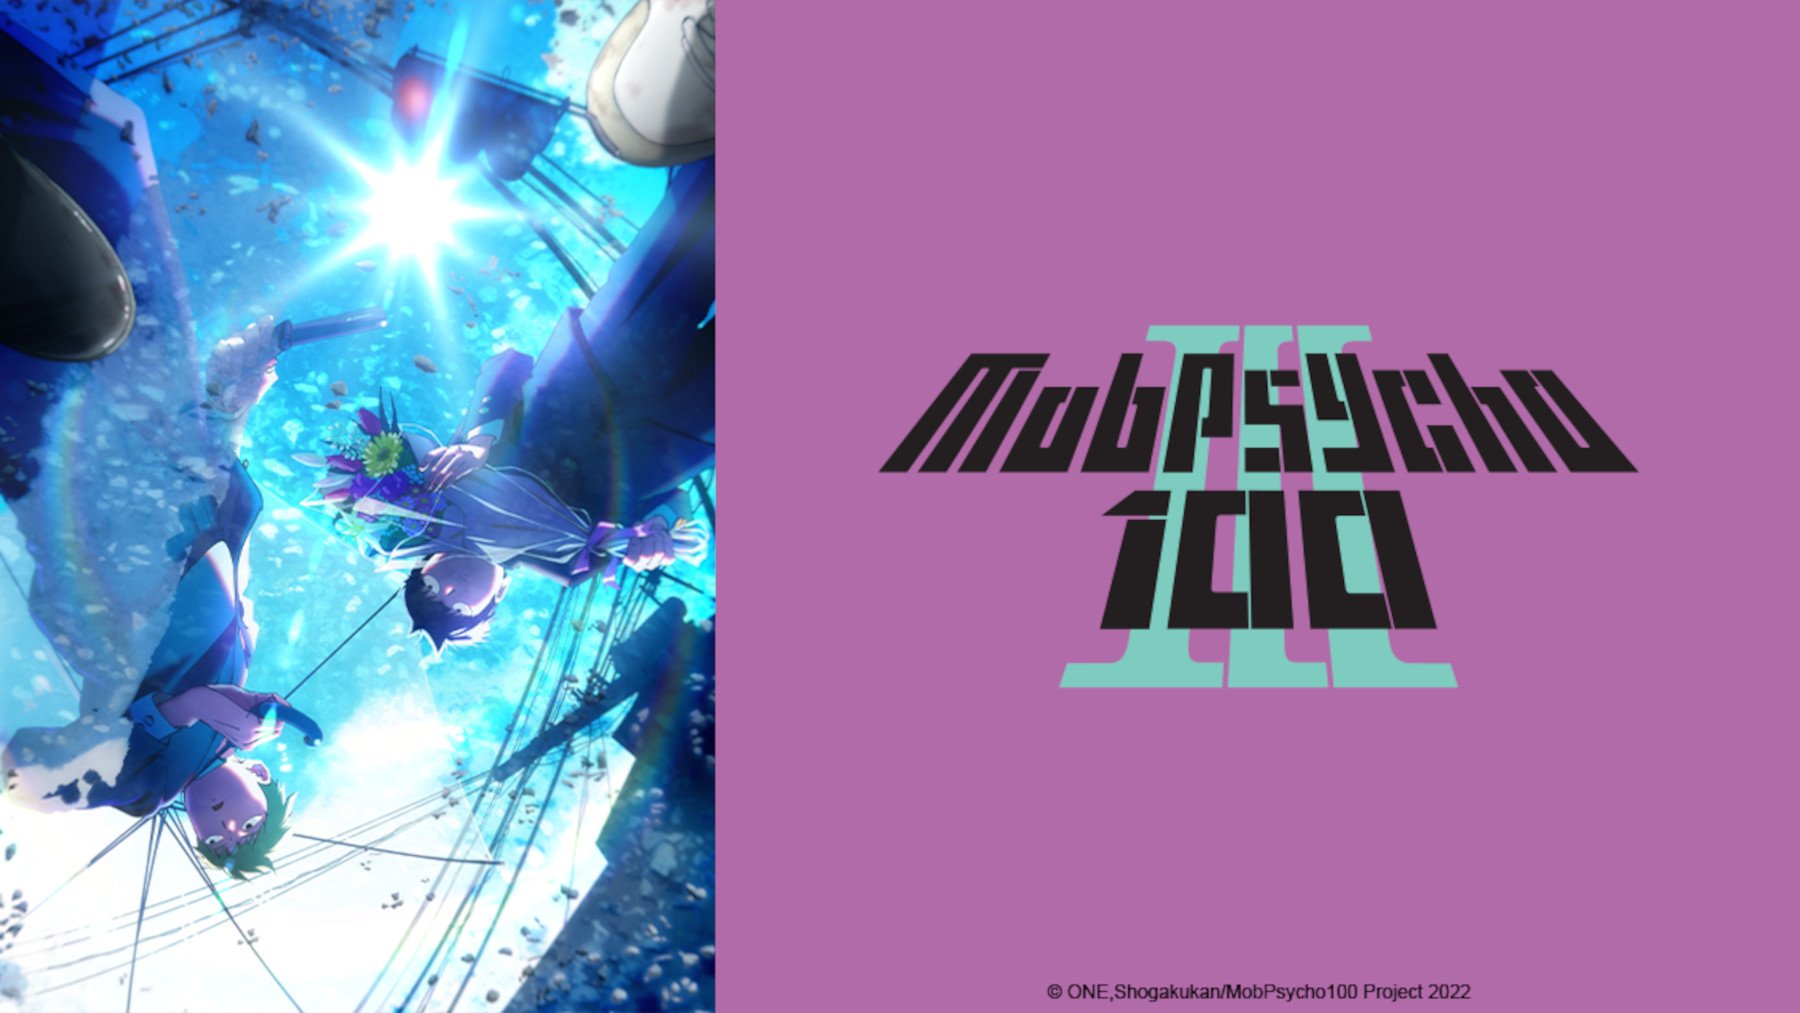 Key art for 'Mob Psycho 100' Season 3 for our article about how many episodes are in it. It features a poster with Mob and Reigen on the left and the anime's logo against a purple background on the right.